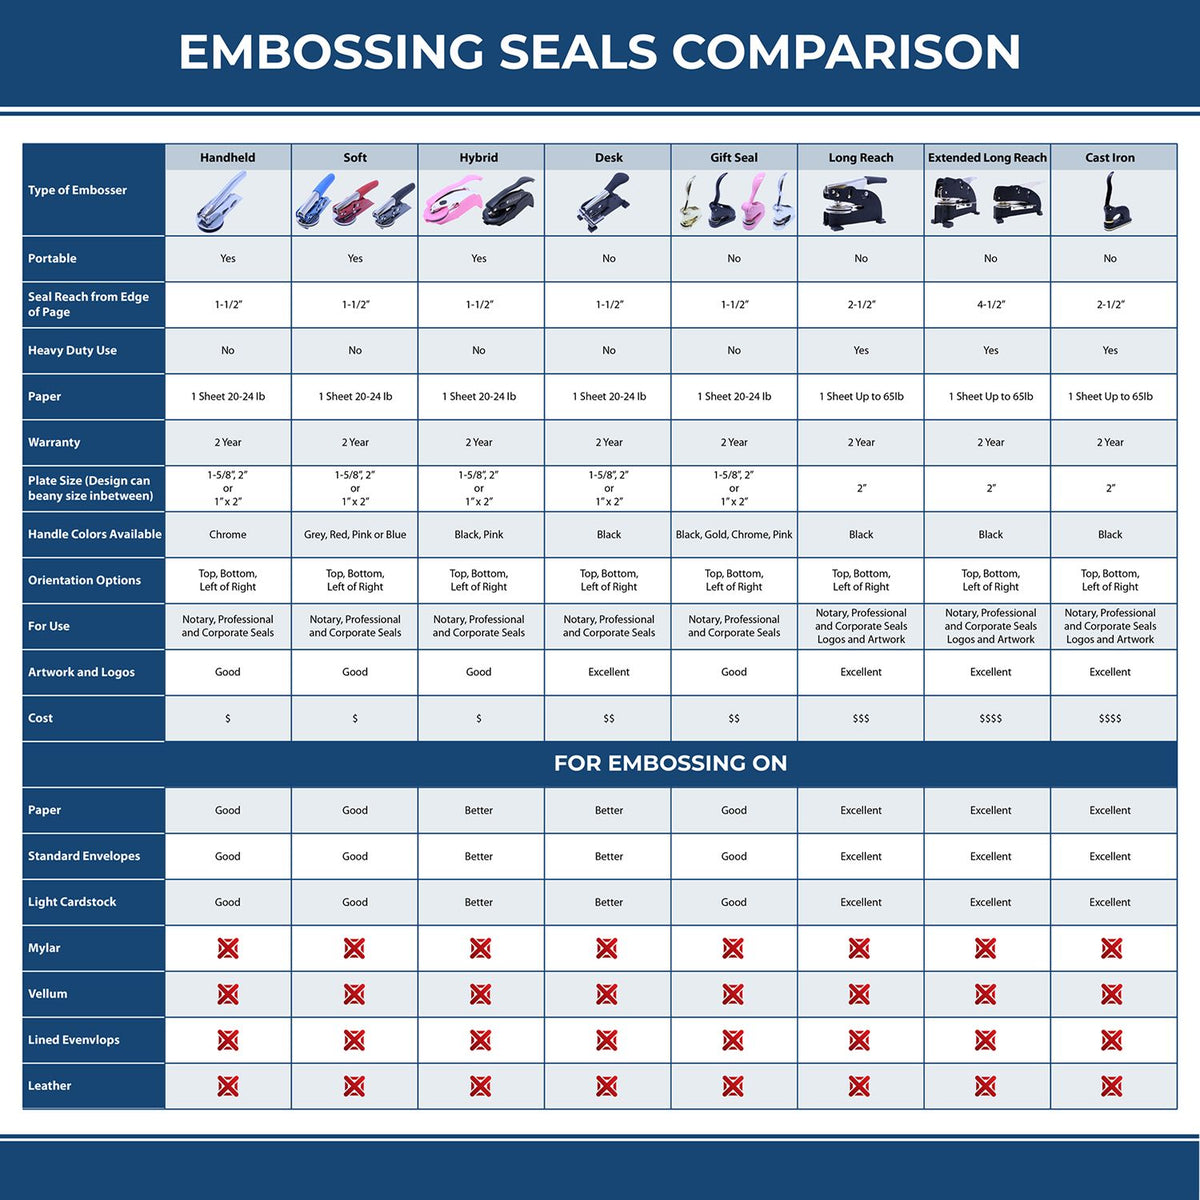 A comparison chart for the different types of mount models available for the State of North Dakota Long Reach Architectural Embossing Seal.